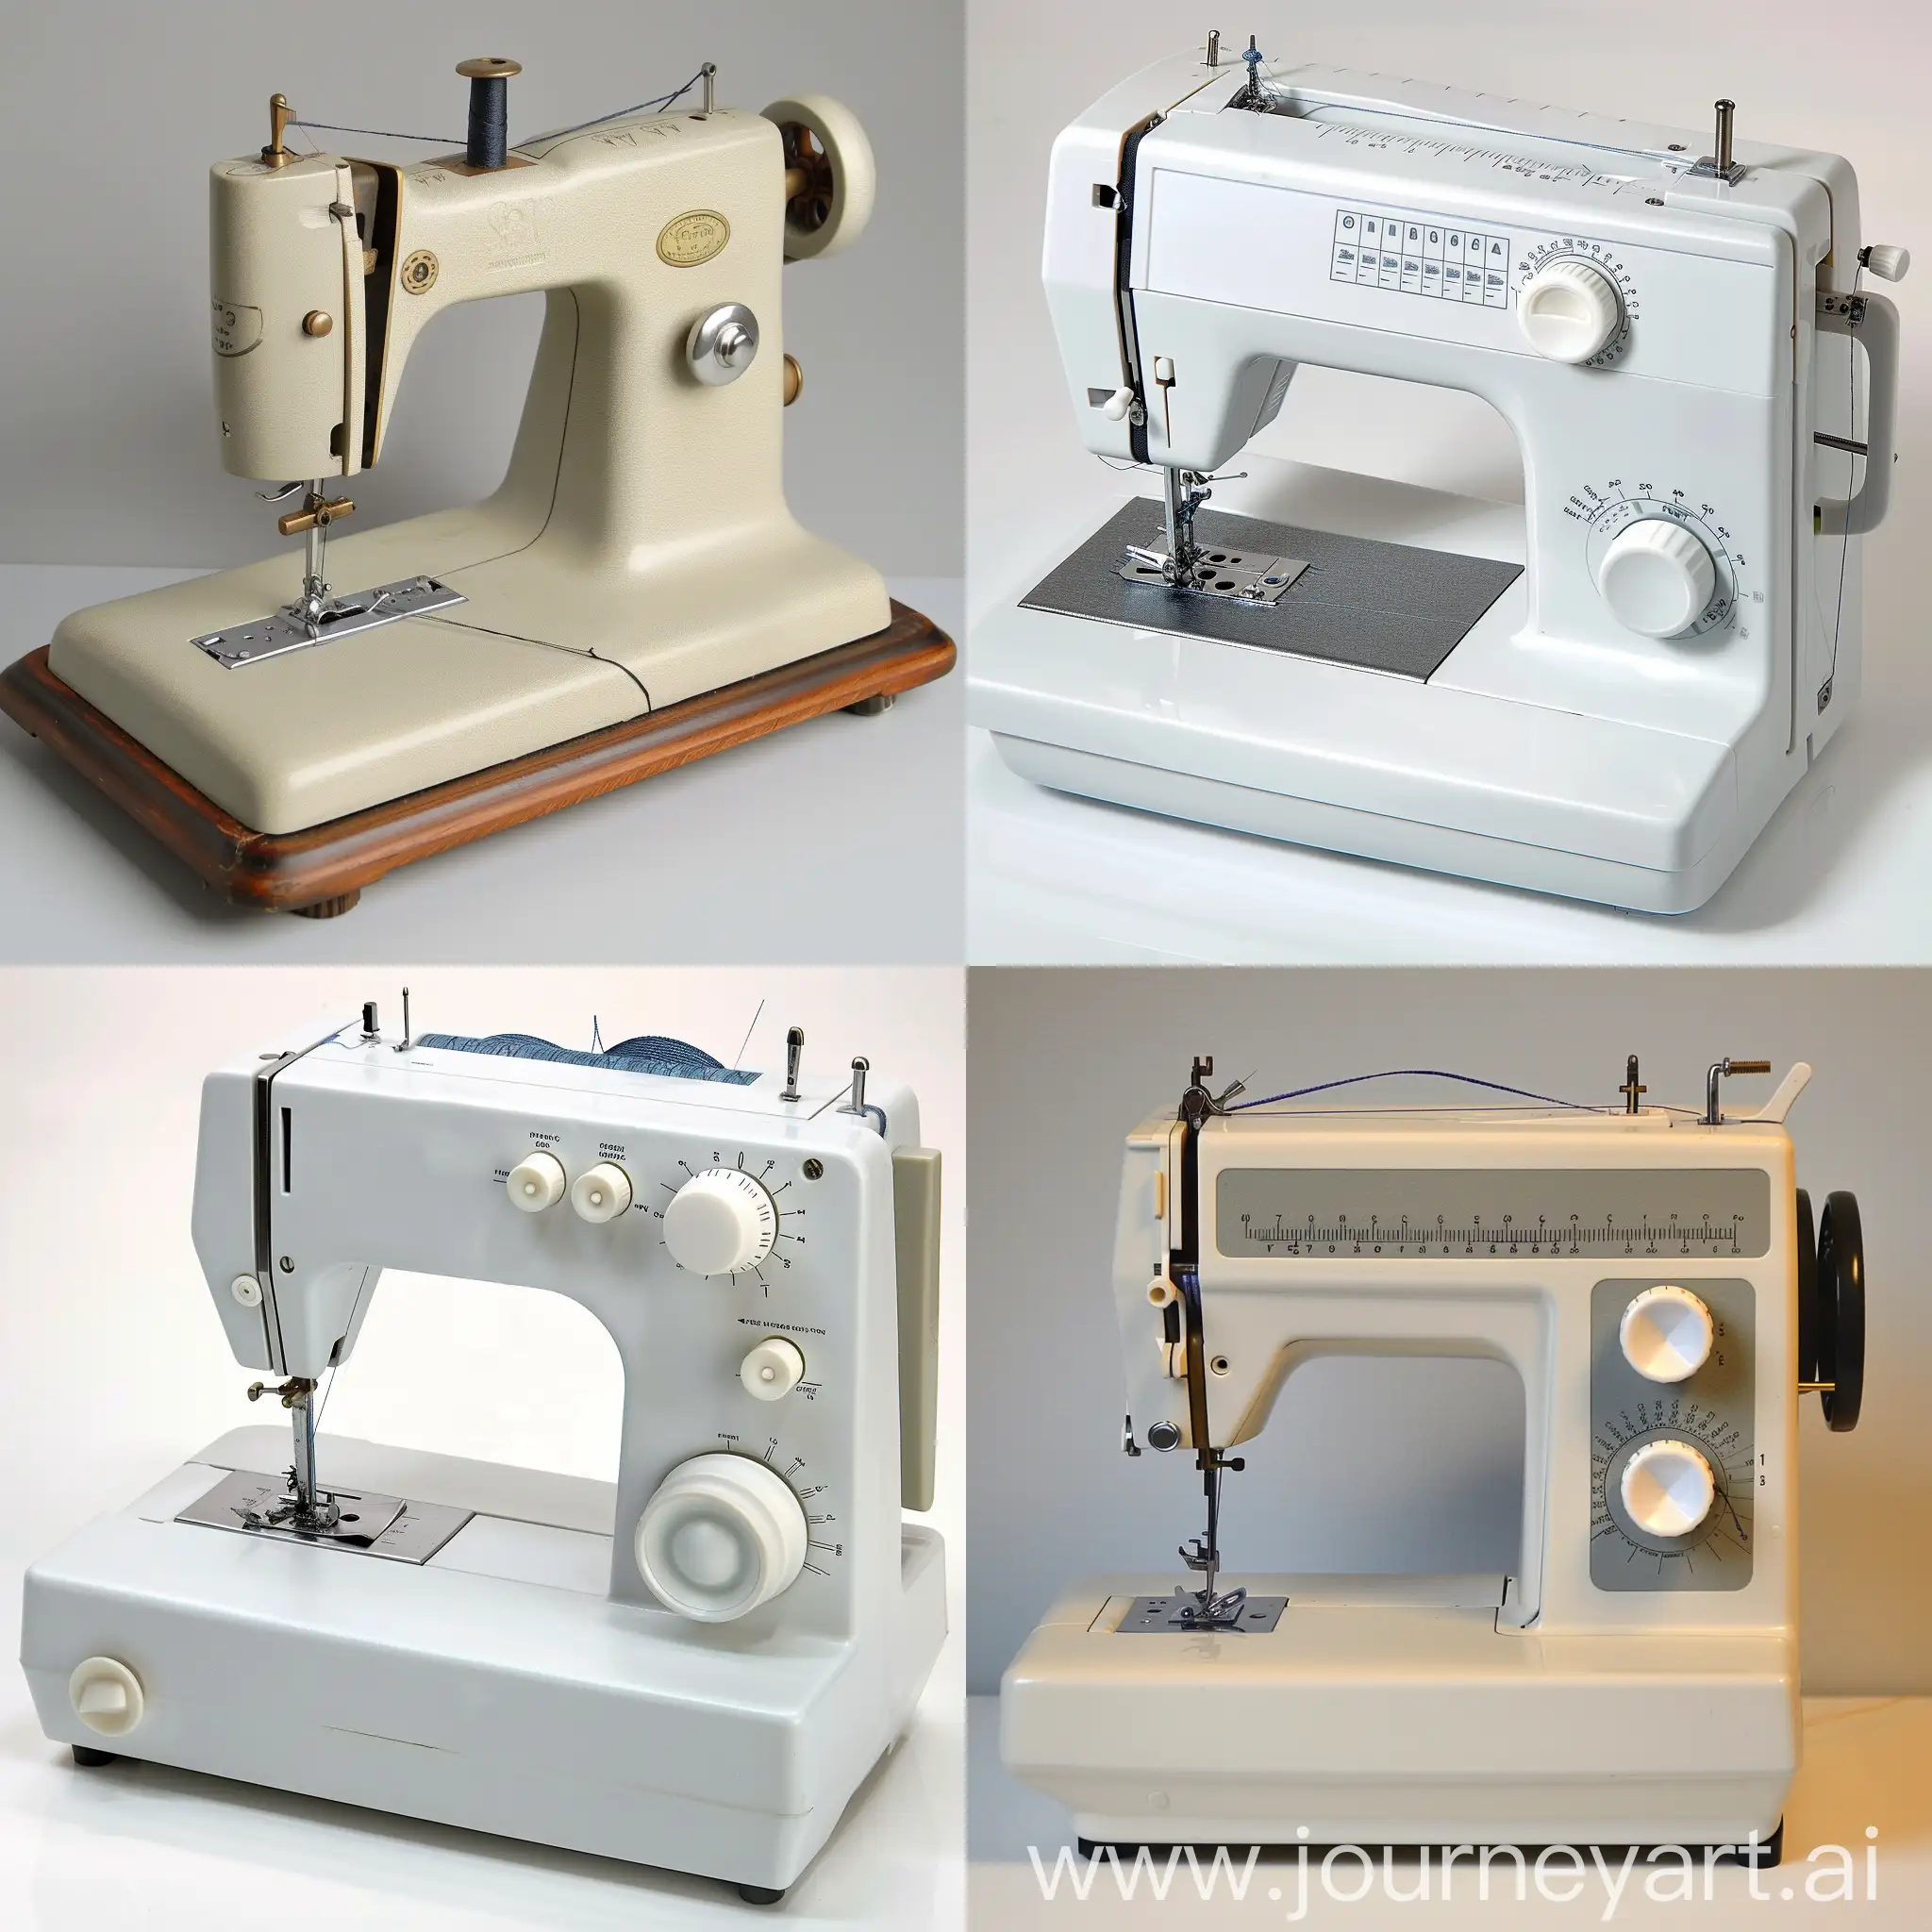 Artistic-Sewing-Machine-in-Vintage-Style